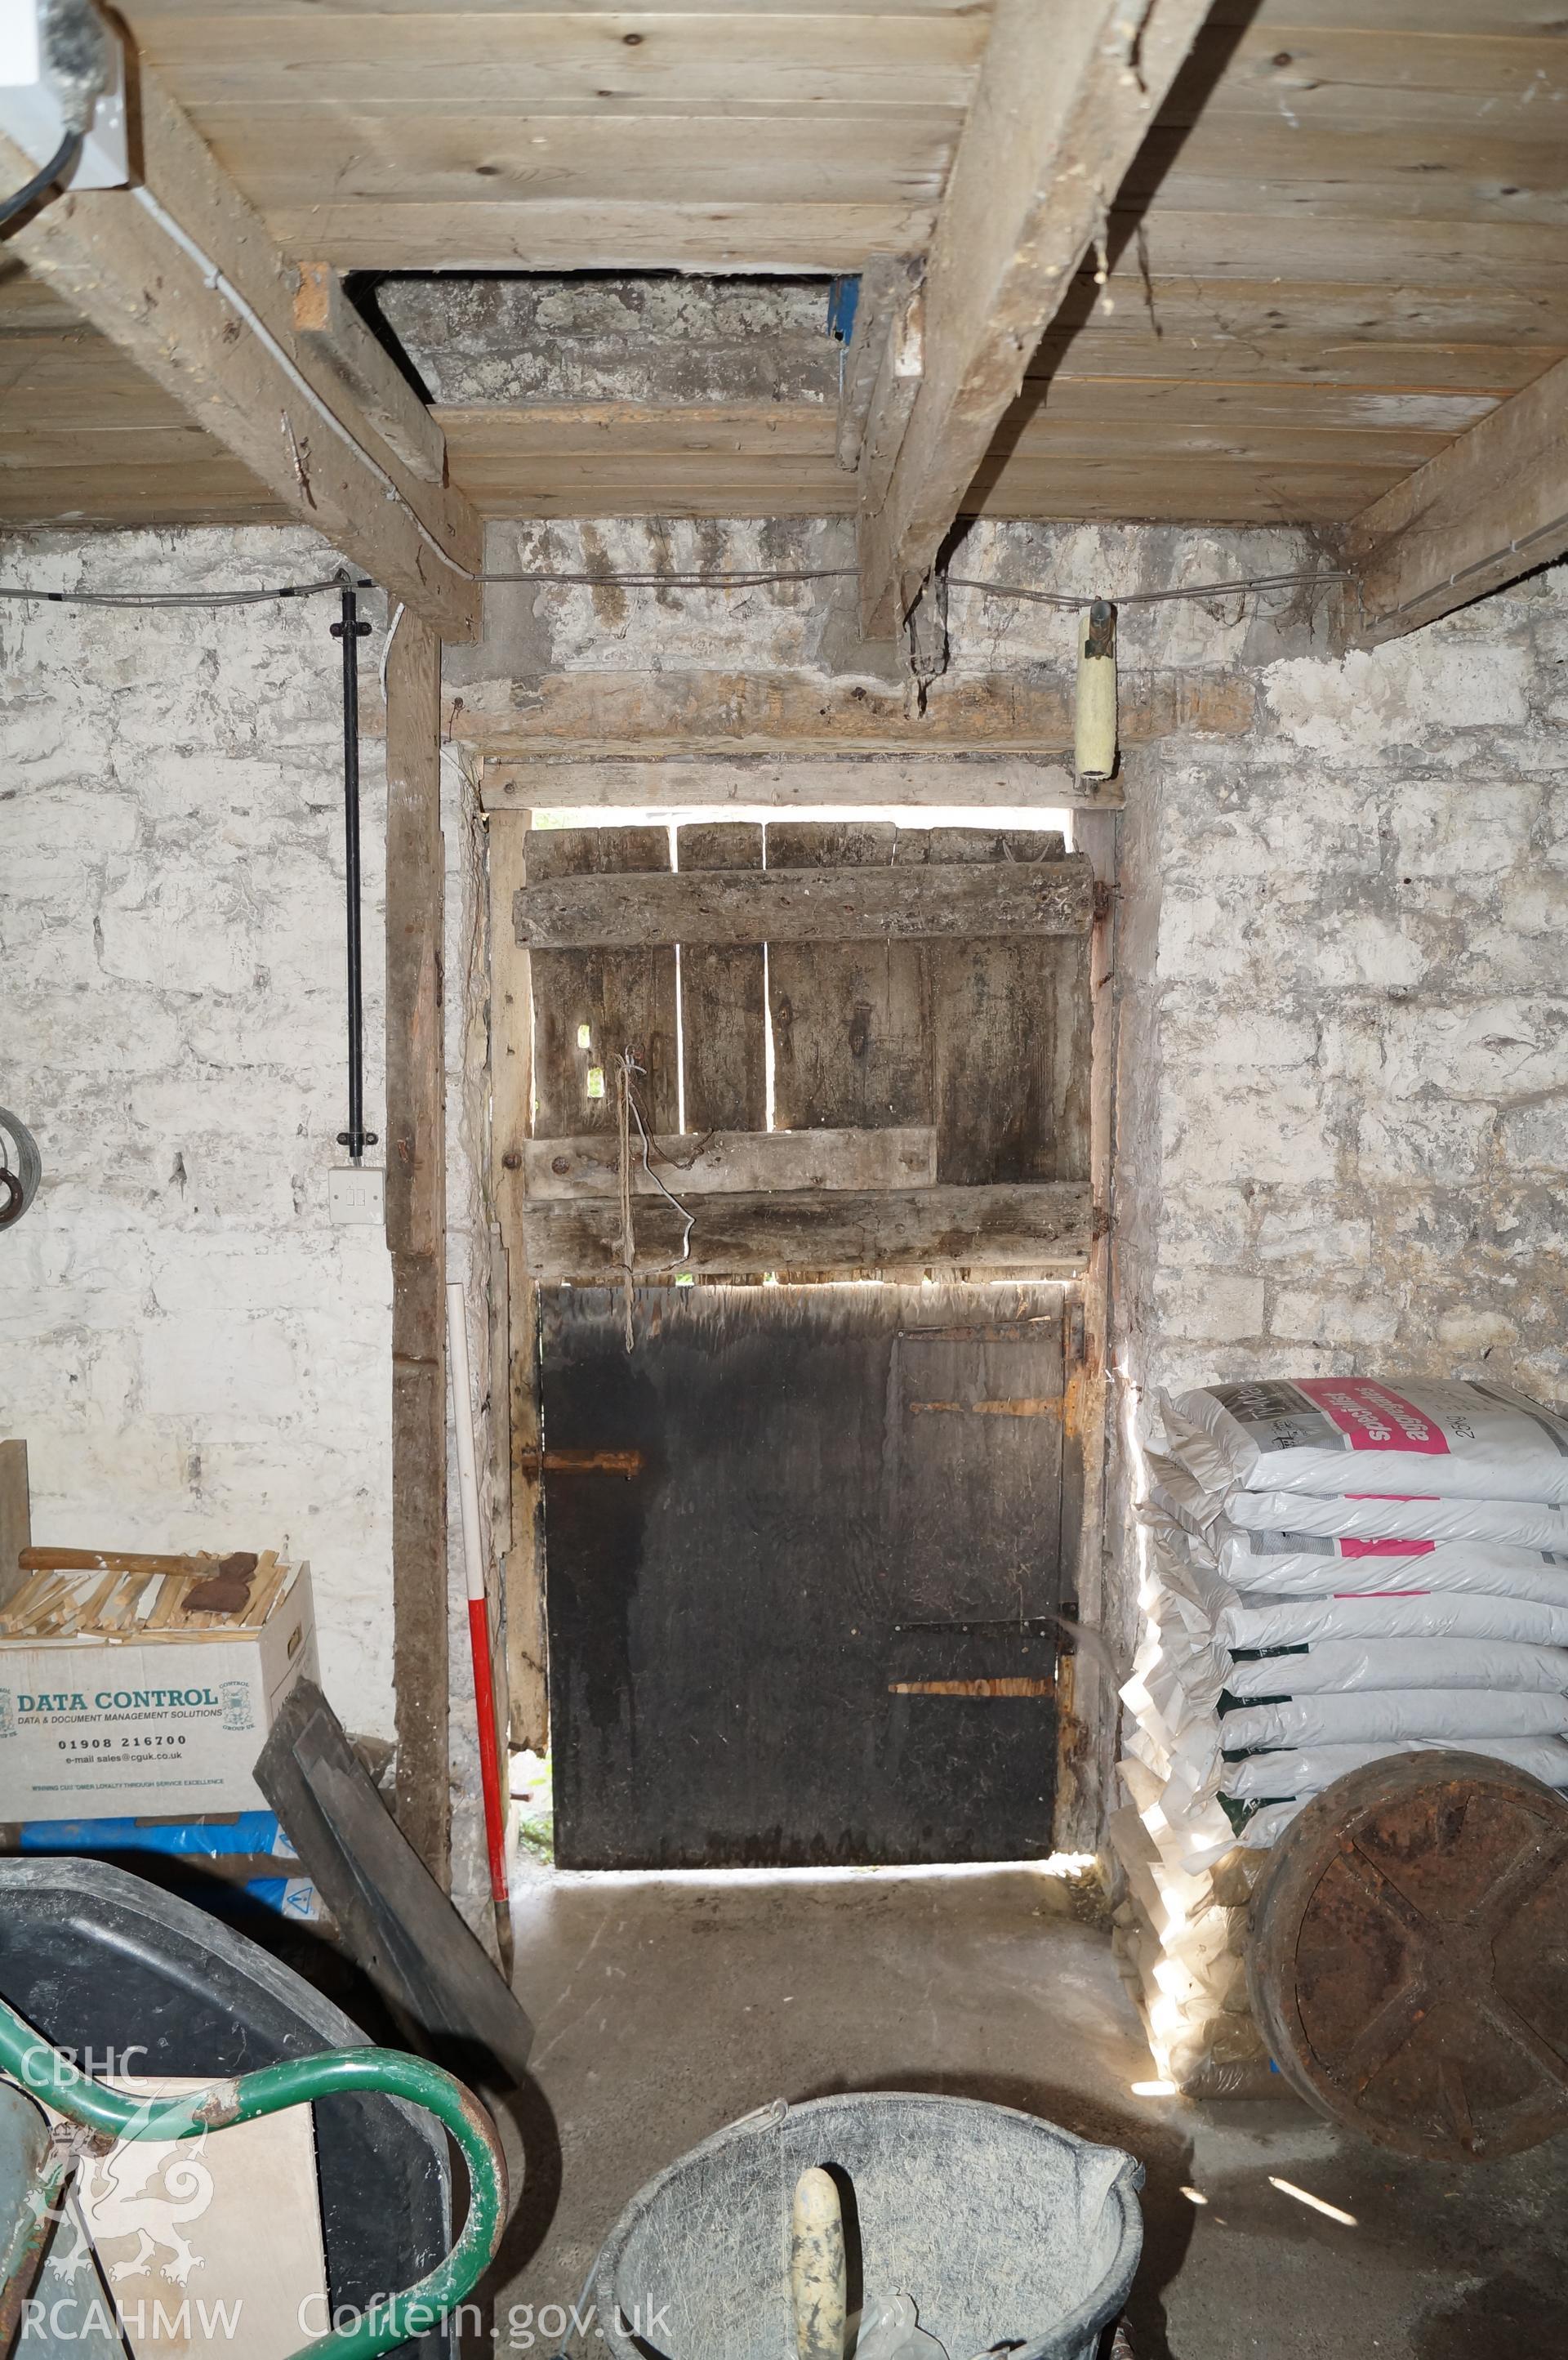 'Internal view looking south southeast at the doorway in the southern wall of barn' at Rowley Court, Llantwit Major. Photograph & description by Jenny Hall & Paul Sambrook of Trysor, 25th May 2017.